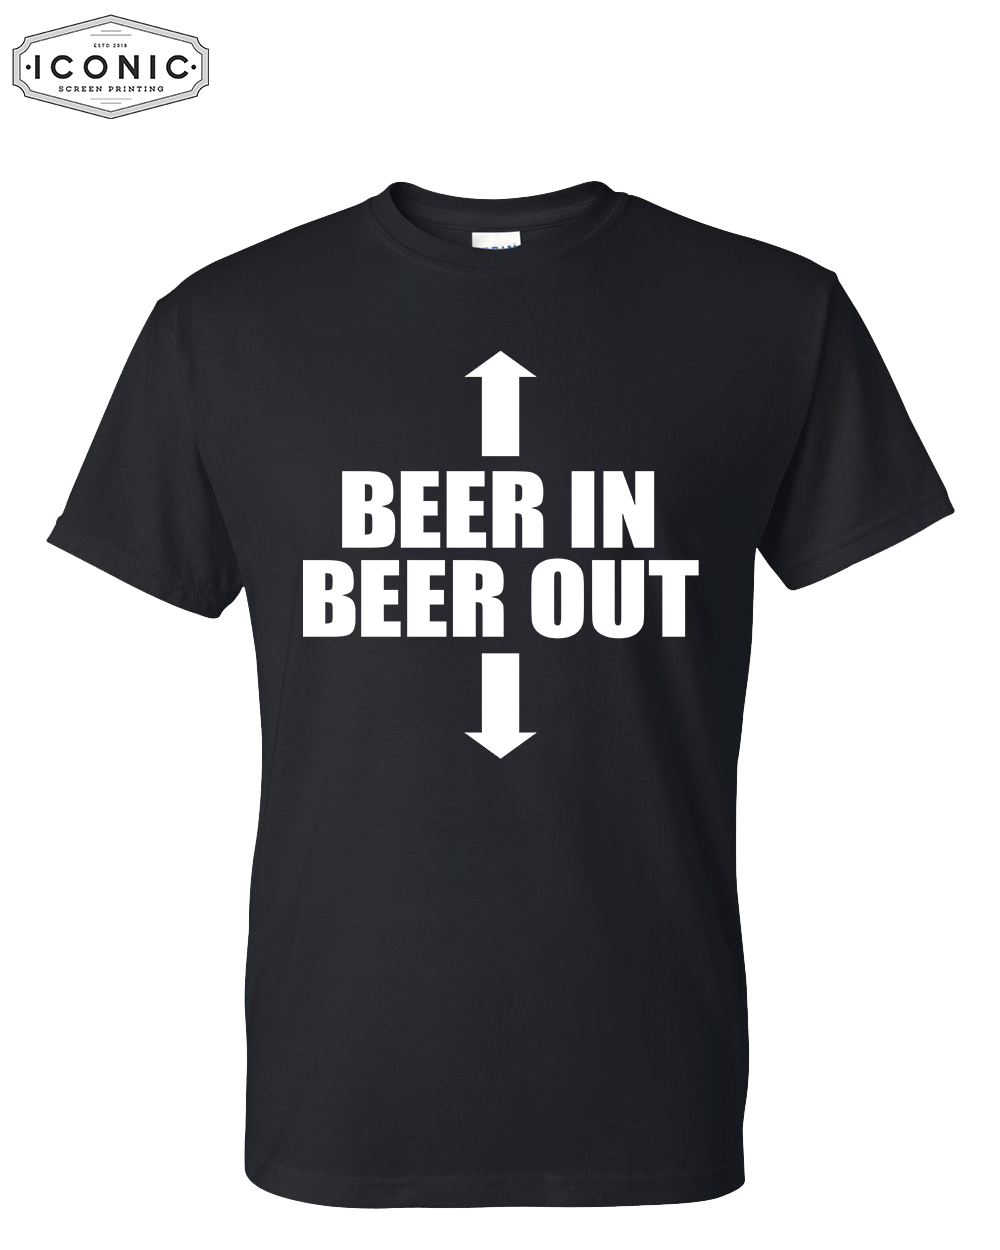 Beer In Beer Out - DryBlend T-shirt